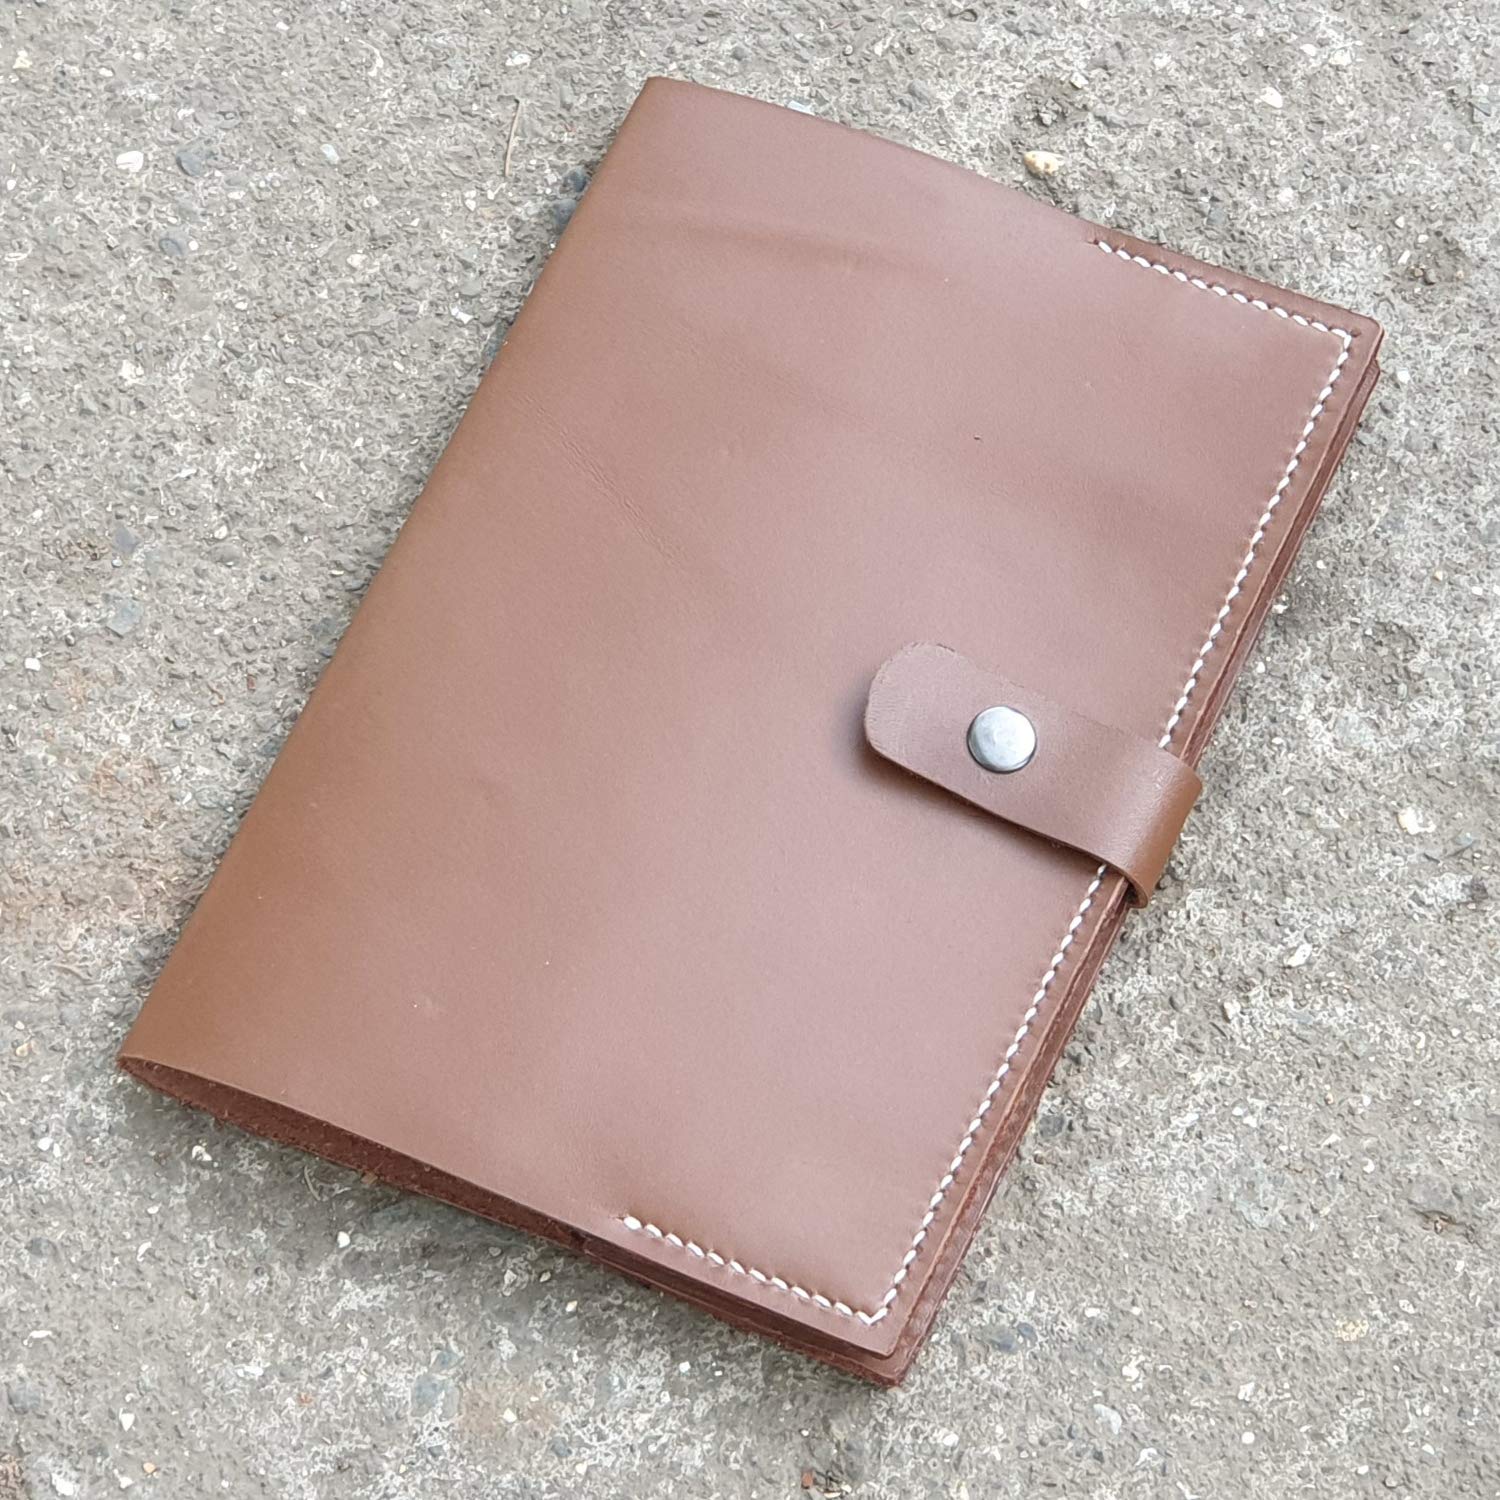 Refillable Leather Journal for Men and Women – 2 Bound Notebooks Lined and Blank